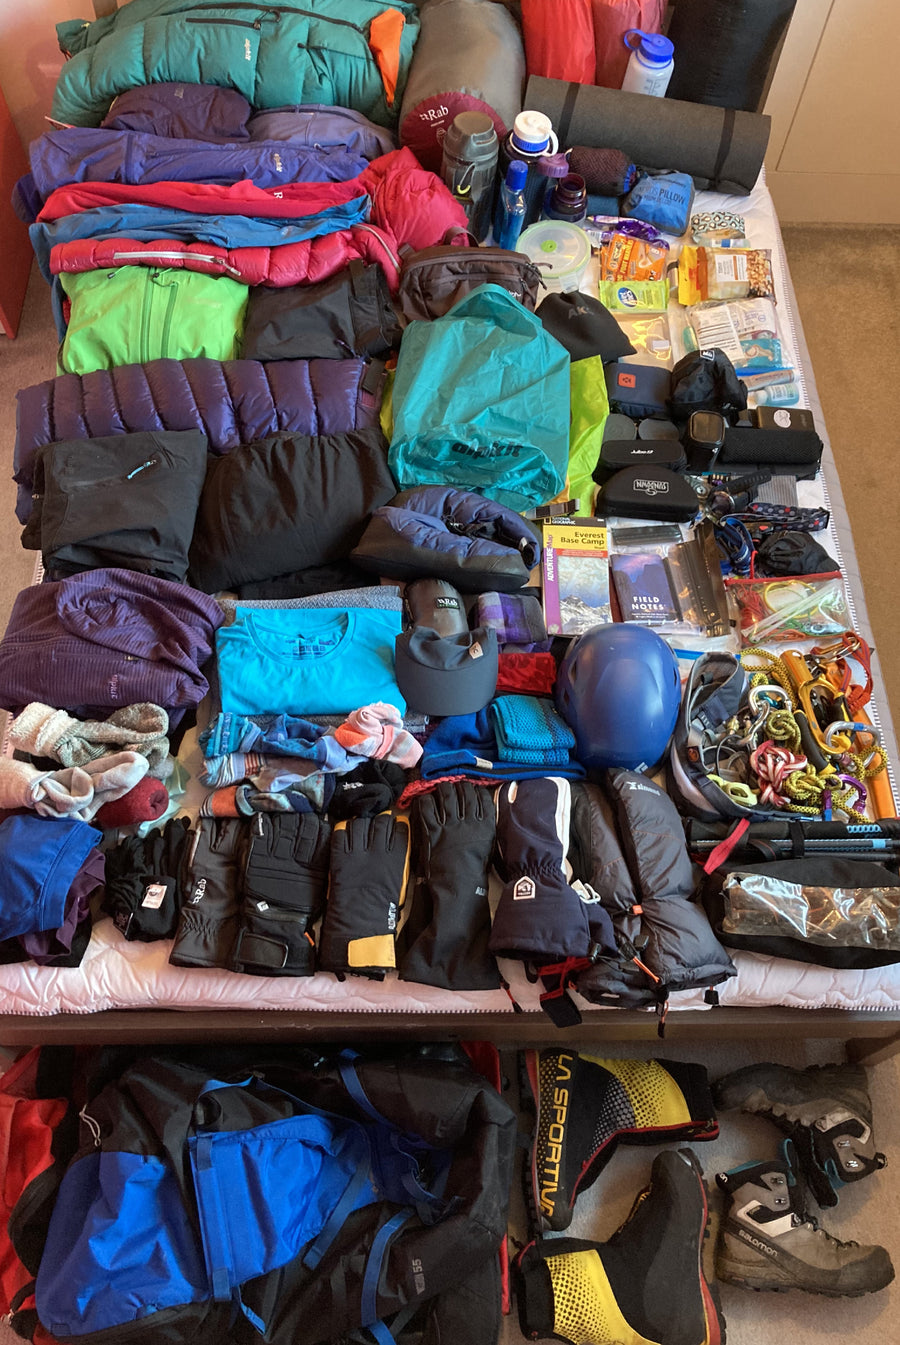 Outdoor kit donations including down jackets and climbing kit